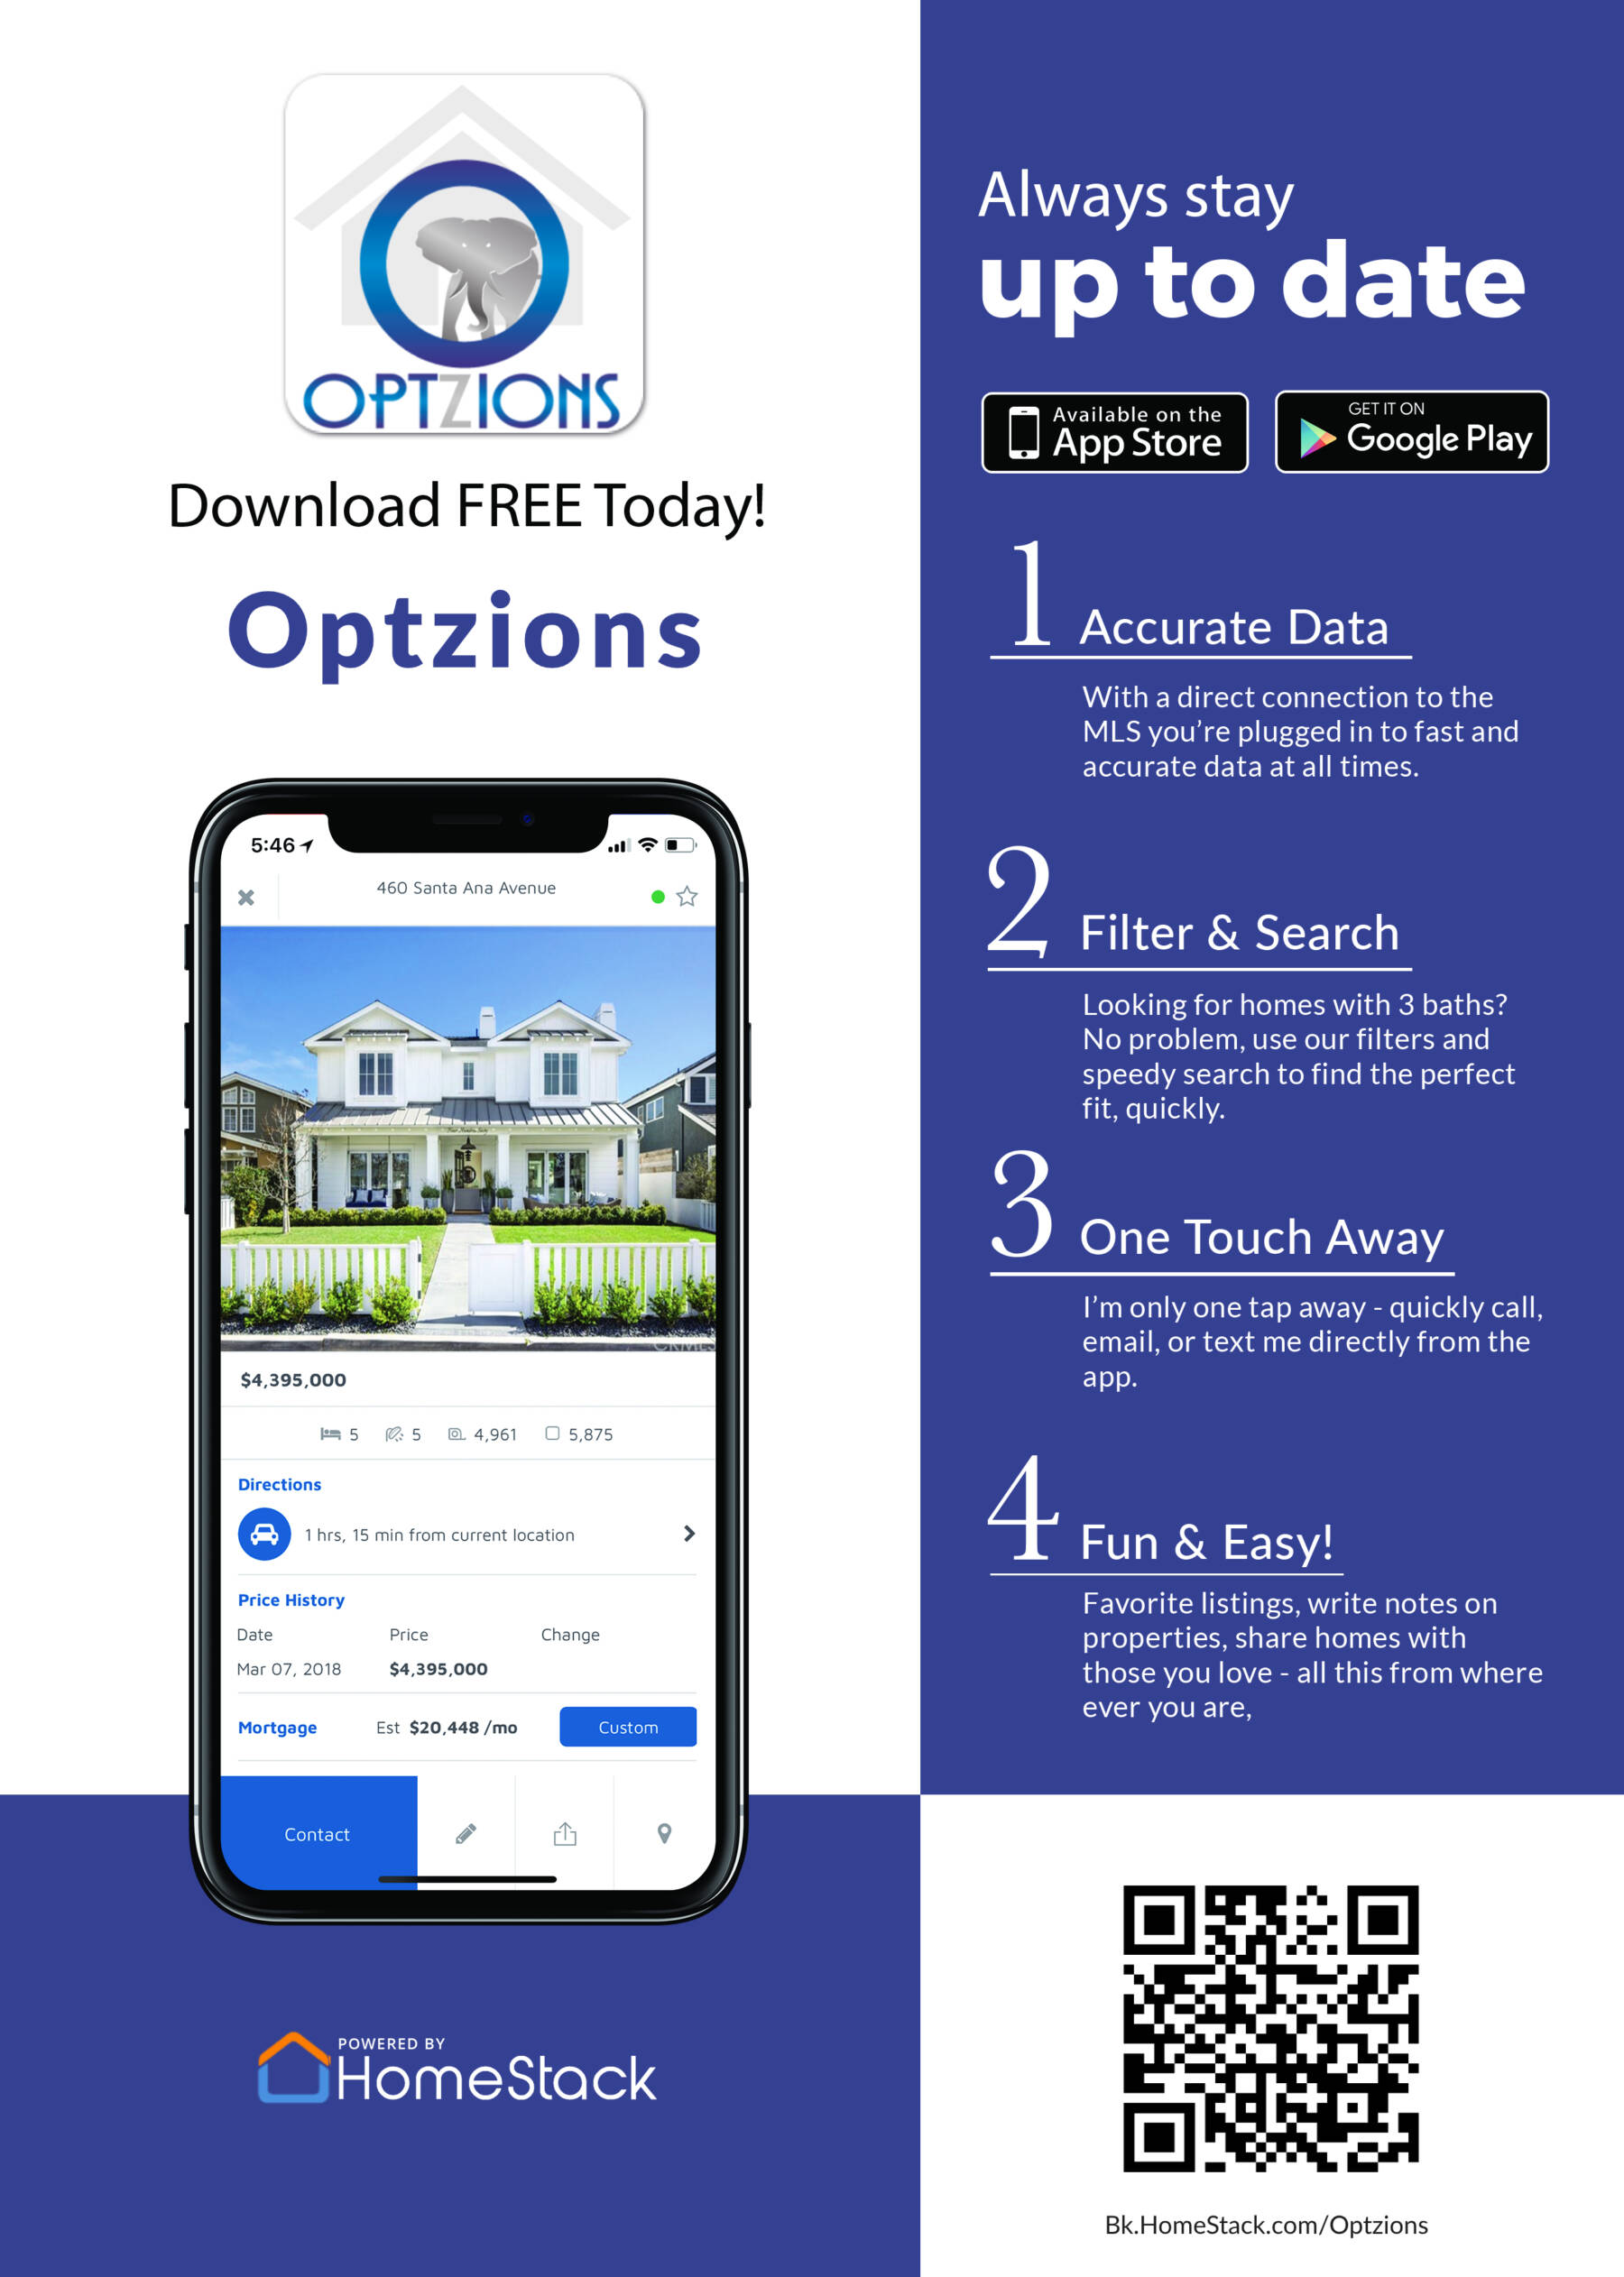 Optzions Real Estate App on Apple Store and Google Play